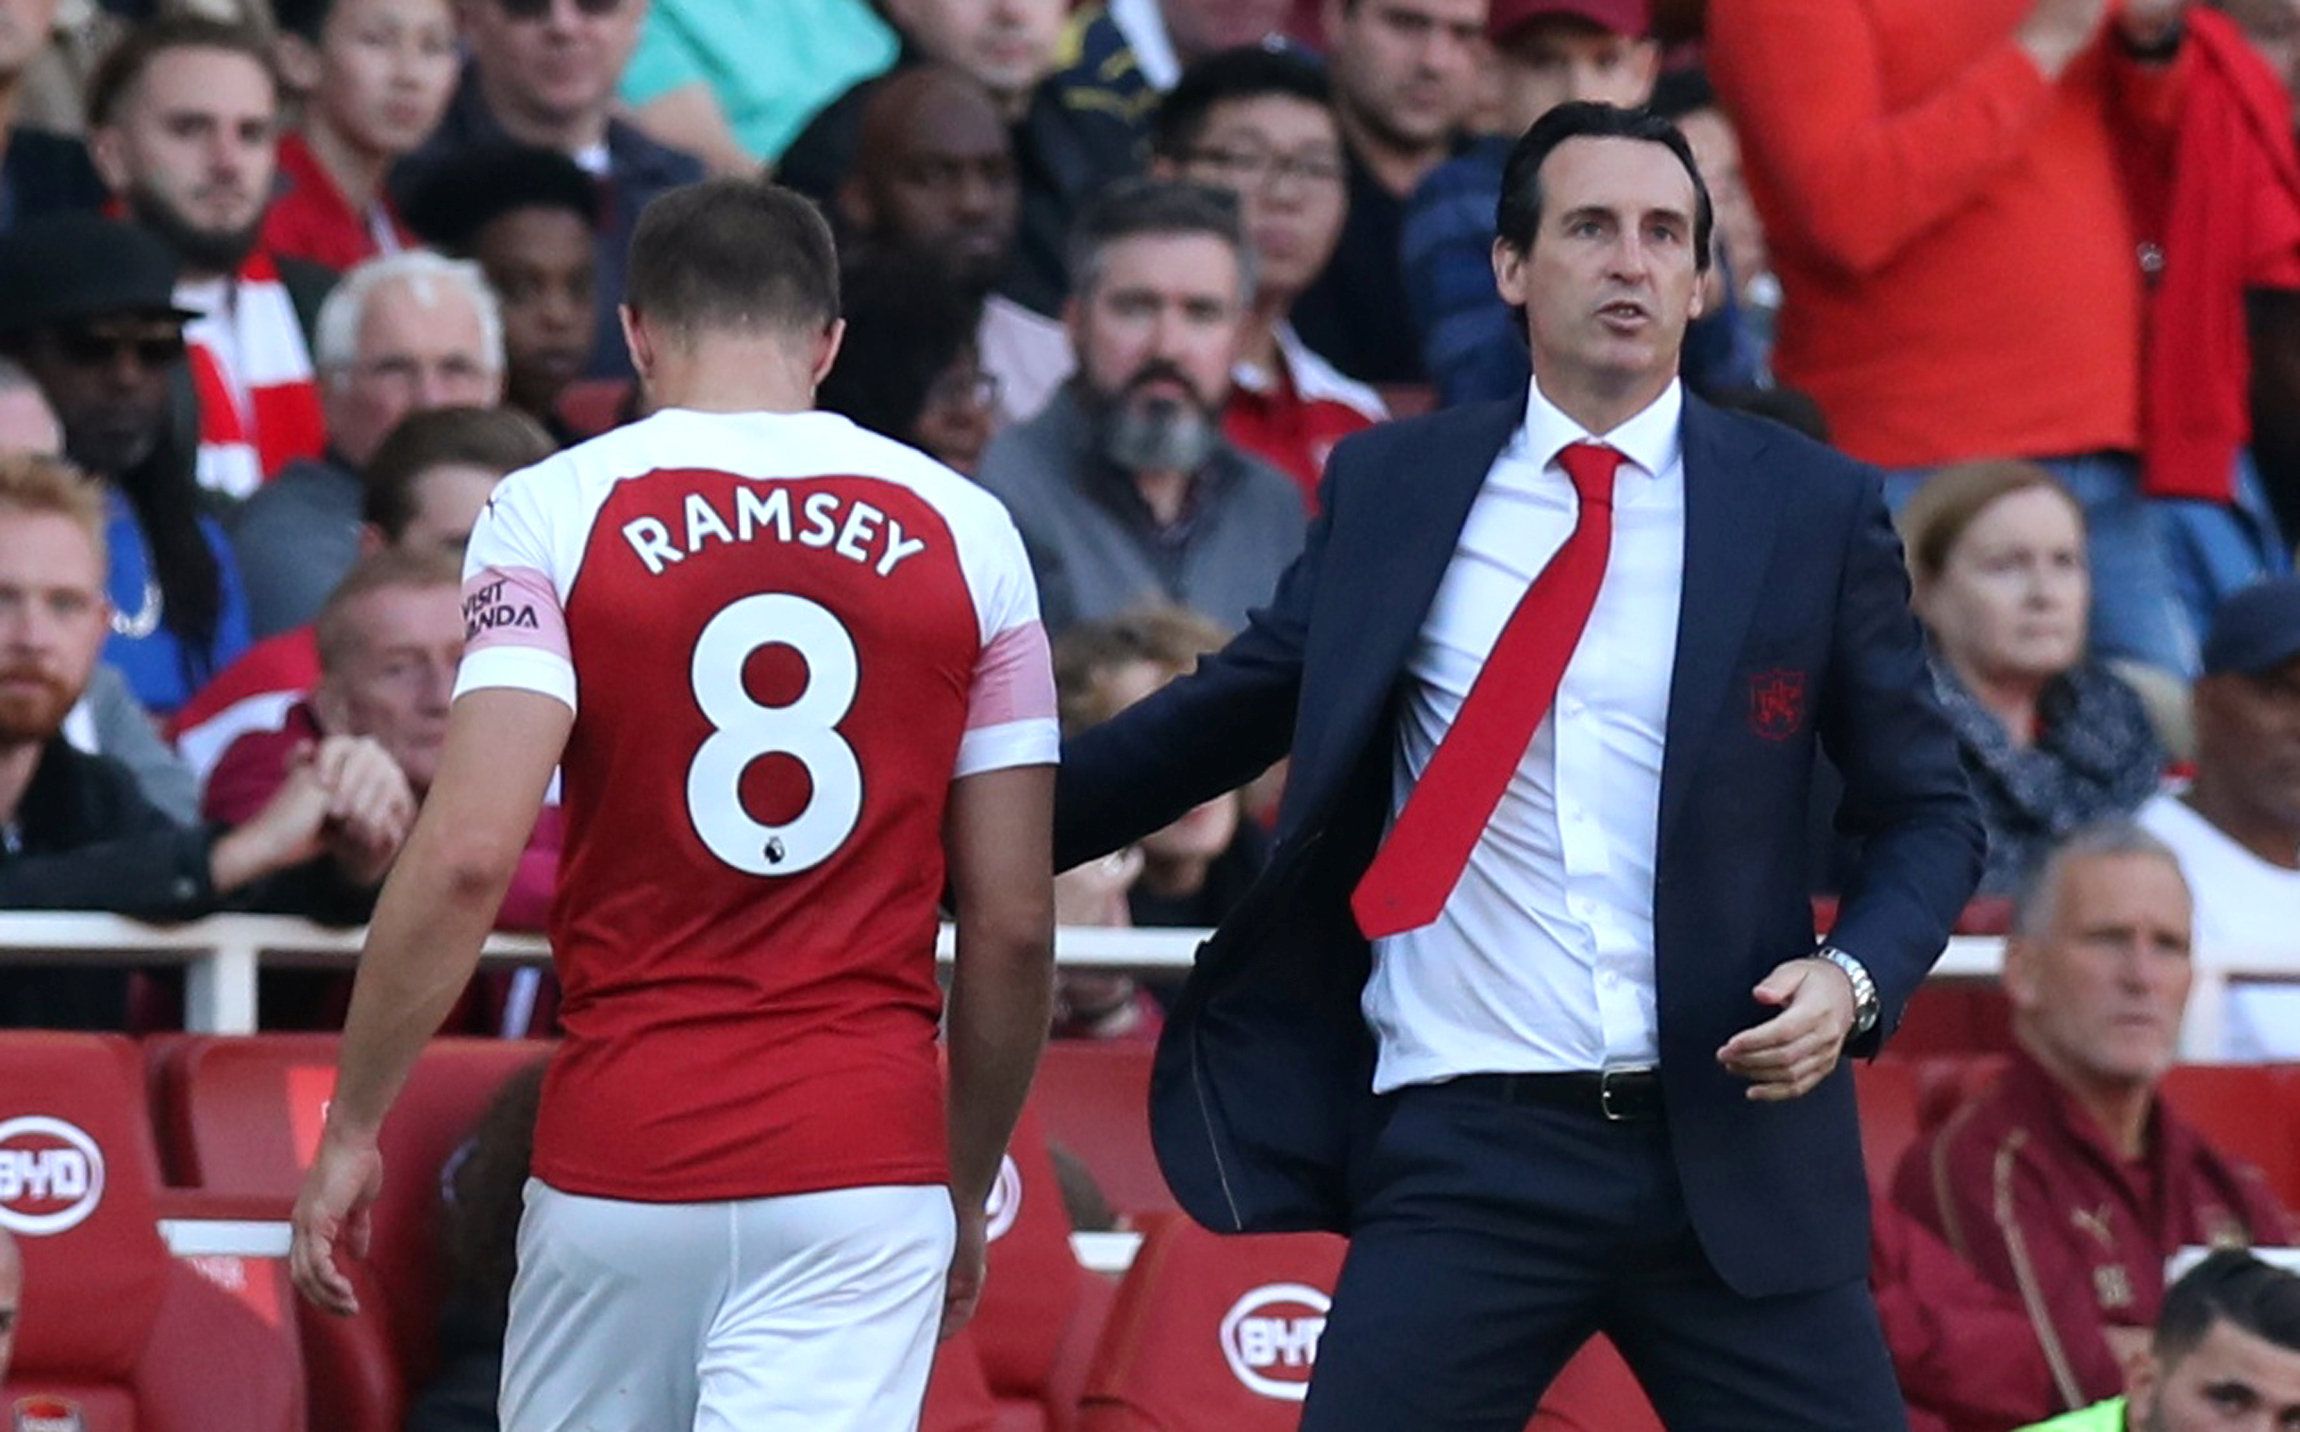 Soccer Football - Premier League - Arsenal v Watford - Emirates Stadium, London, Britain - September 29, 2018  Arsenal manager Unai Emery with Aaron Ramsey as he is substituted            Action Images via Reuters/Peter Cziborra  EDITORIAL USE ONLY. No use with unauthorized audio, video, data, fixture lists, club/league logos or 